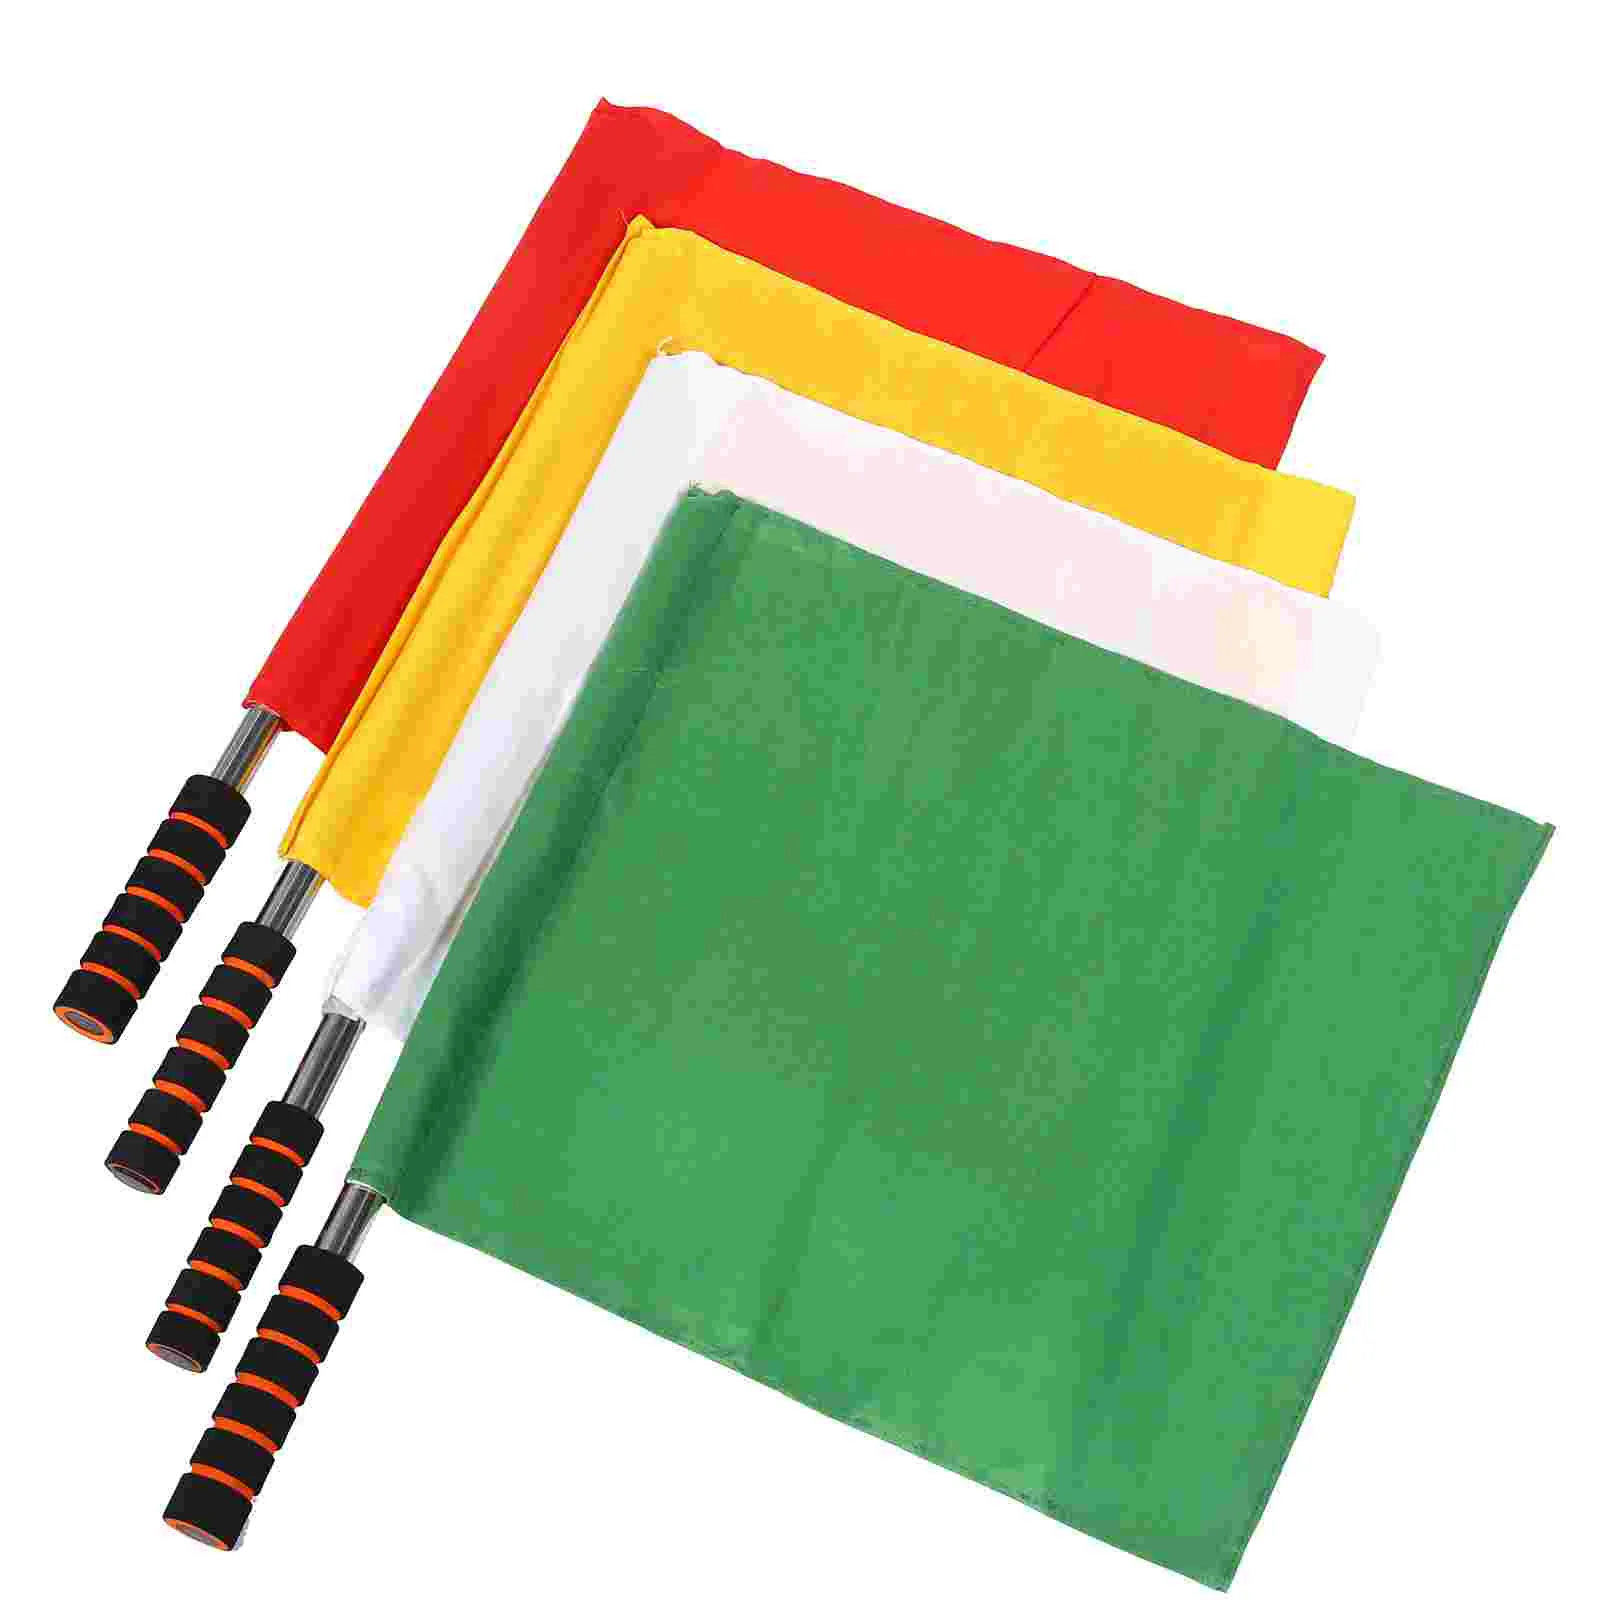 

4 Pcs Flag Referee Race Conducting Flags Hand Sports Soccer Warning Colored Football Match Signal Handheld